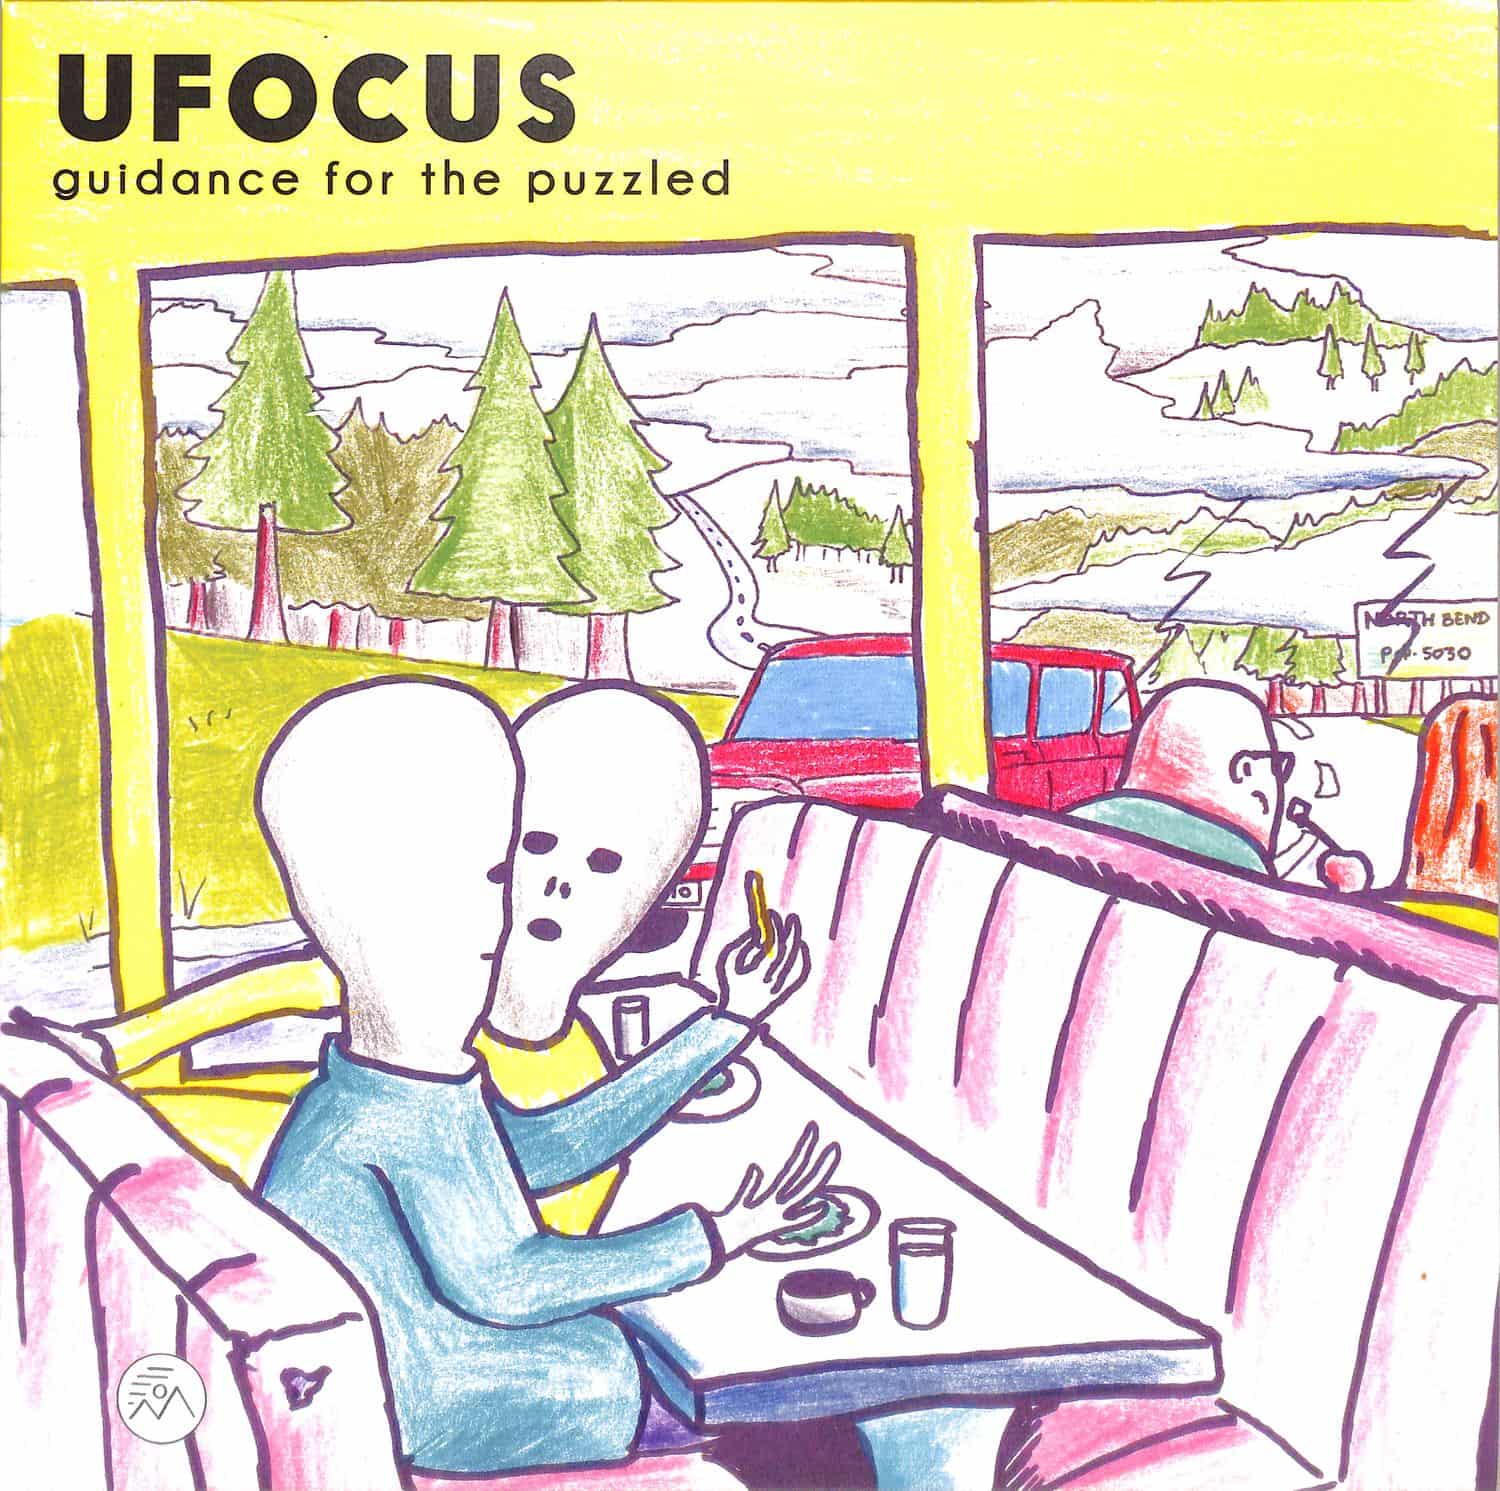 Ufocus - GUIDANCE FOR THE PUZZLED 